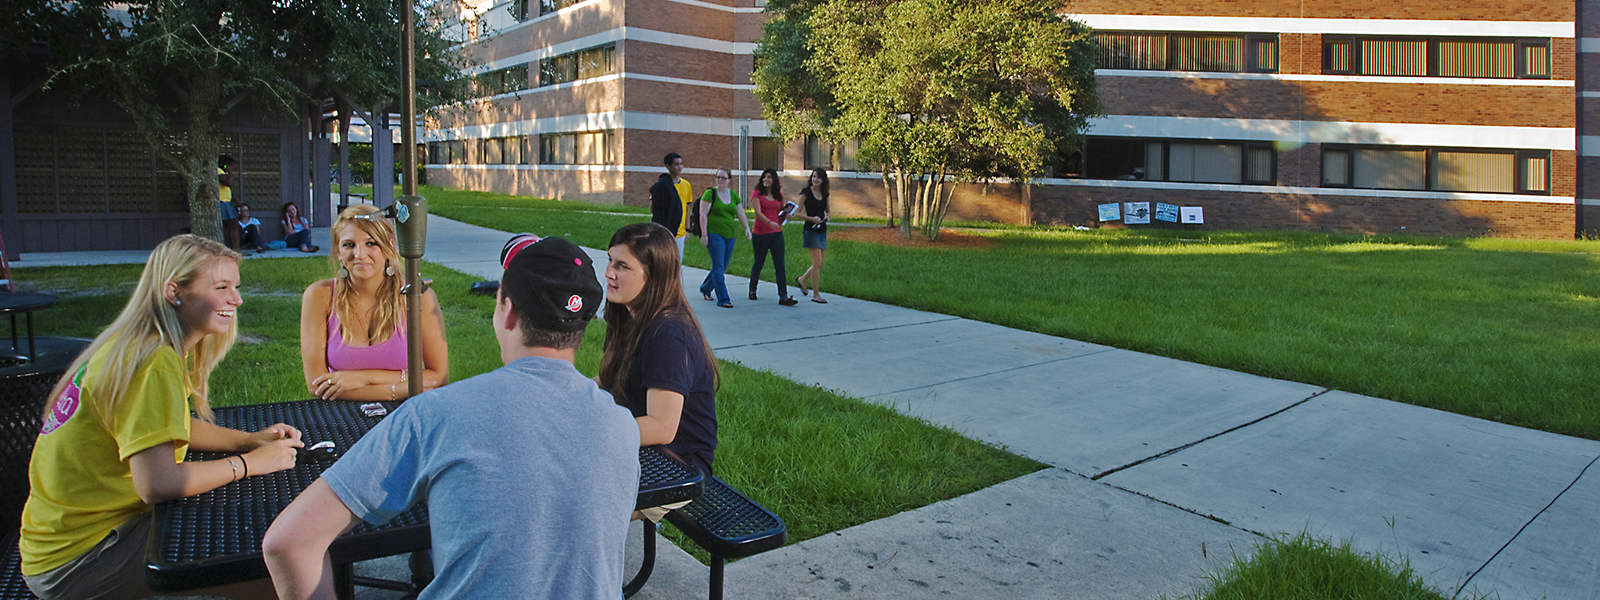 Students chat at a table outside the residence halls.